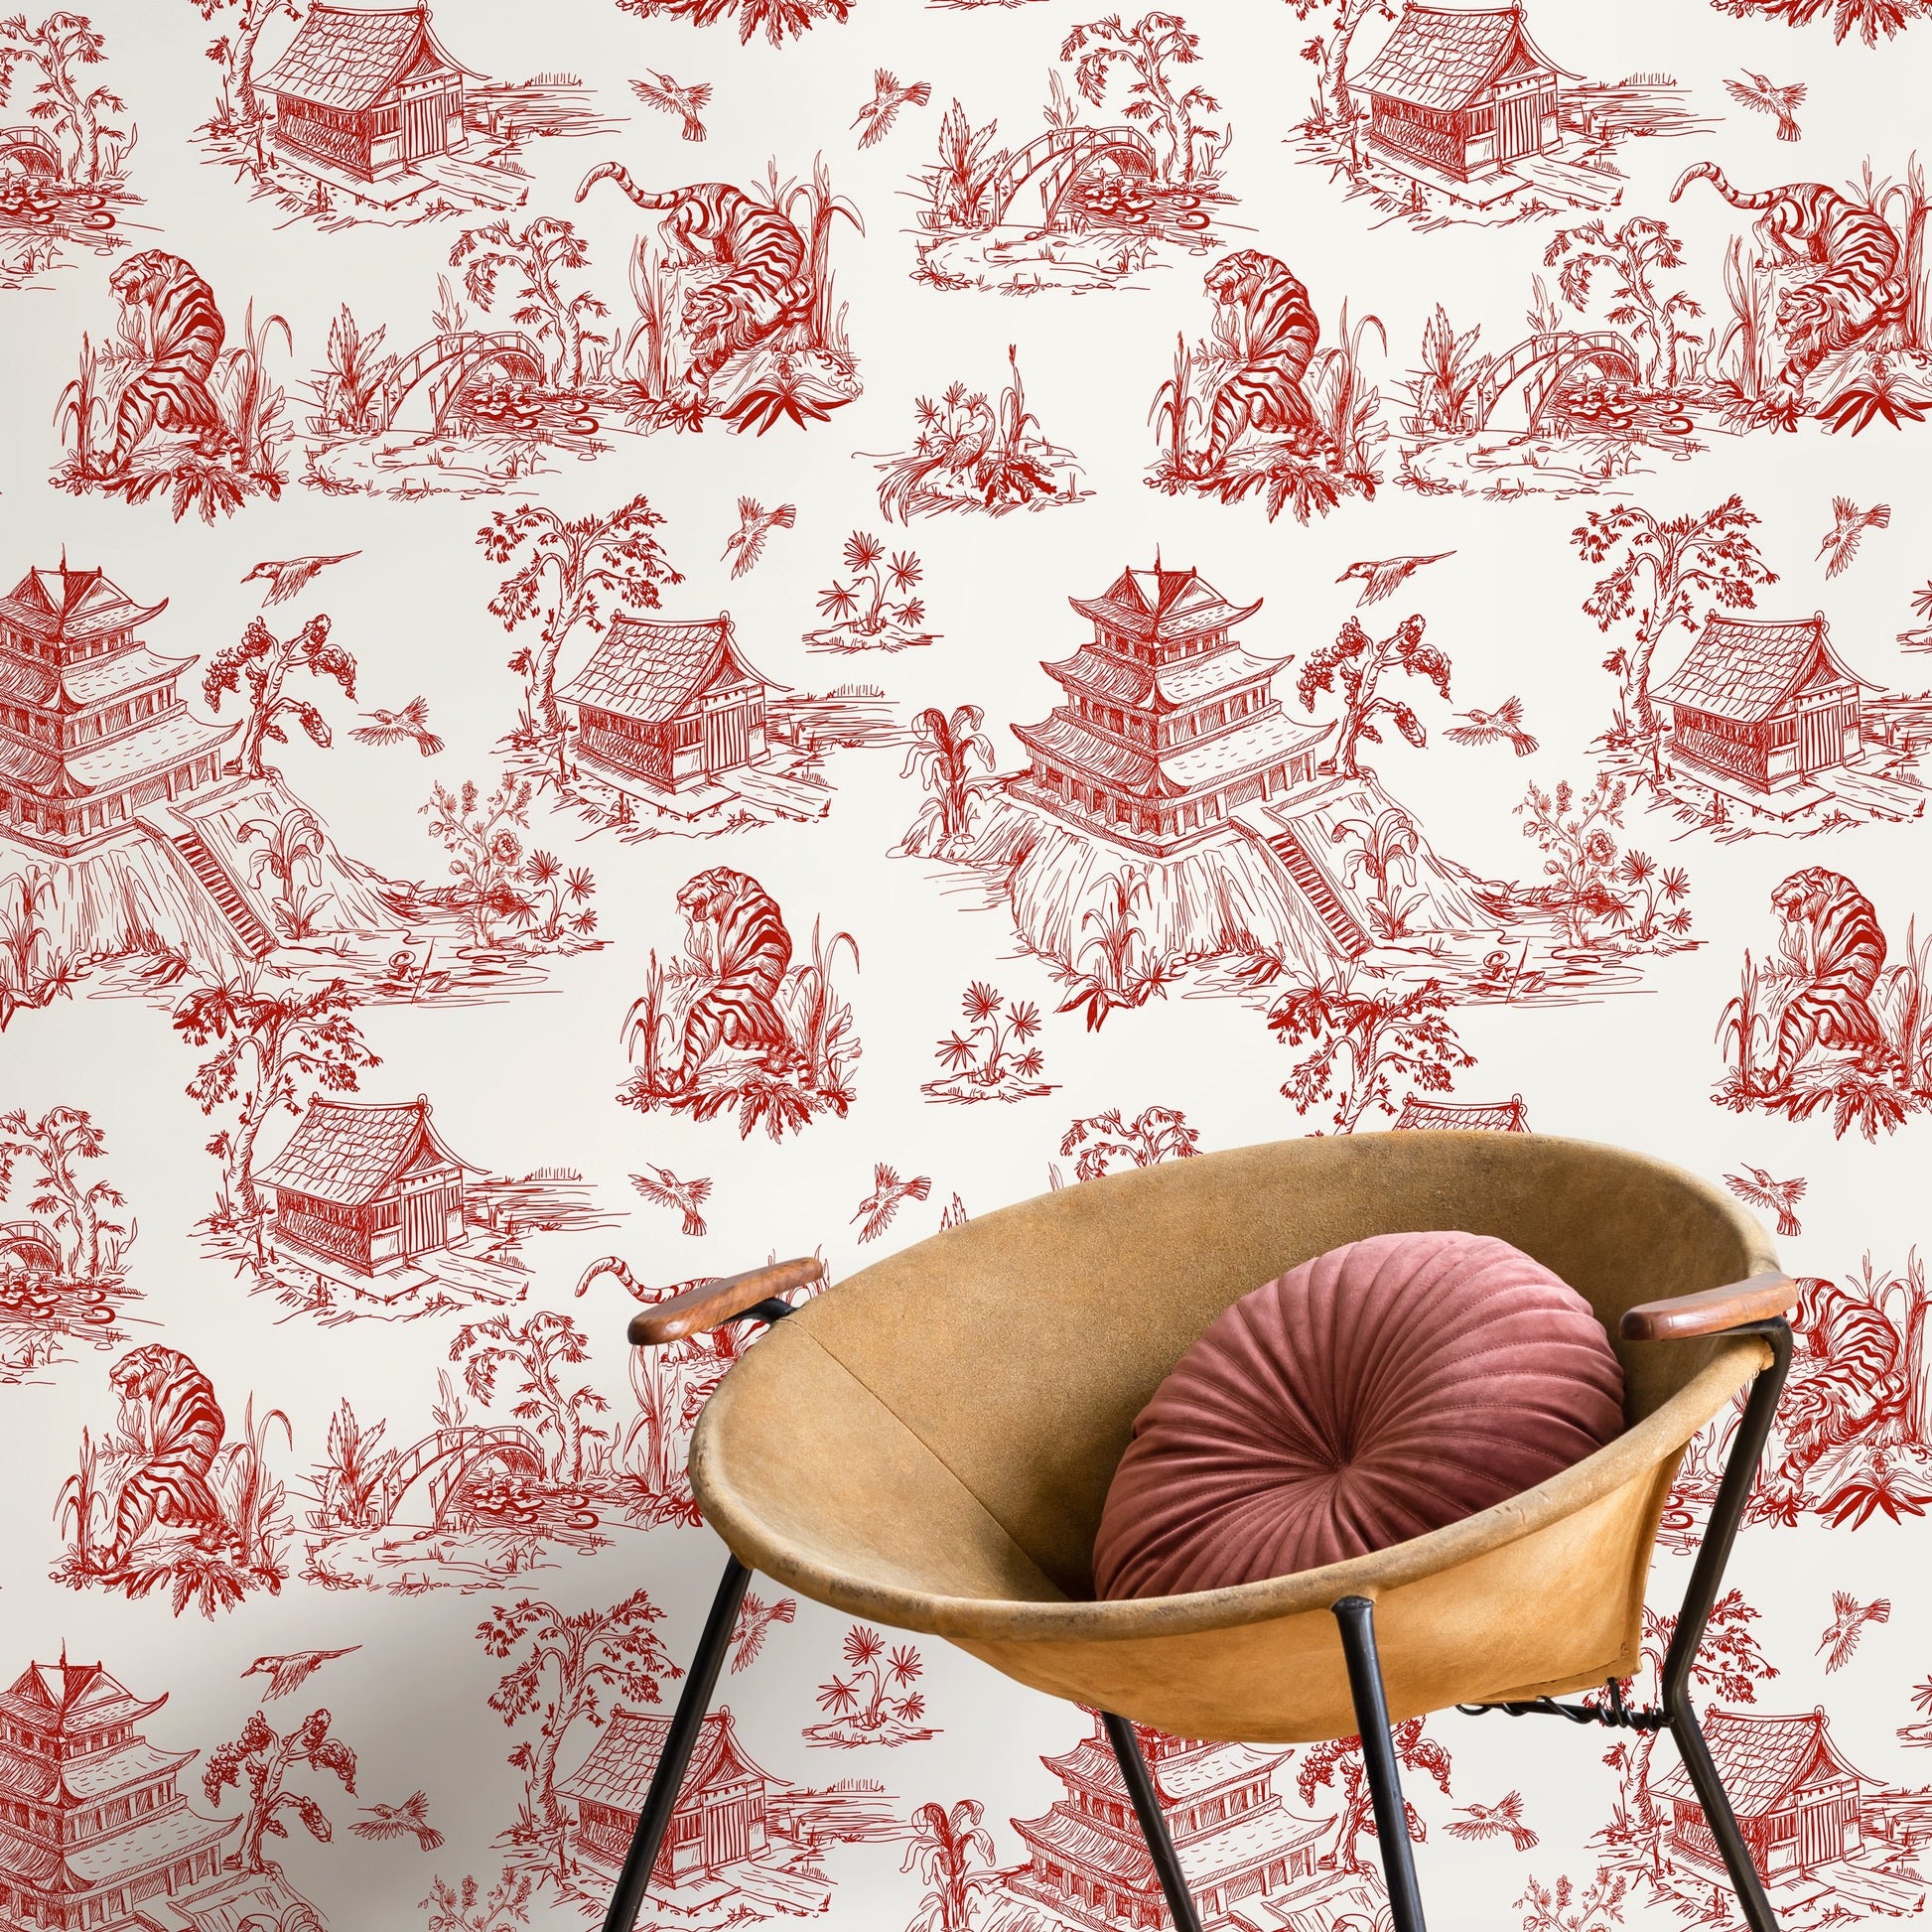 Dragon Waves Wallpaper - Removable Wallpaper Peel and Stick Wallpaper Wall Paper - C105